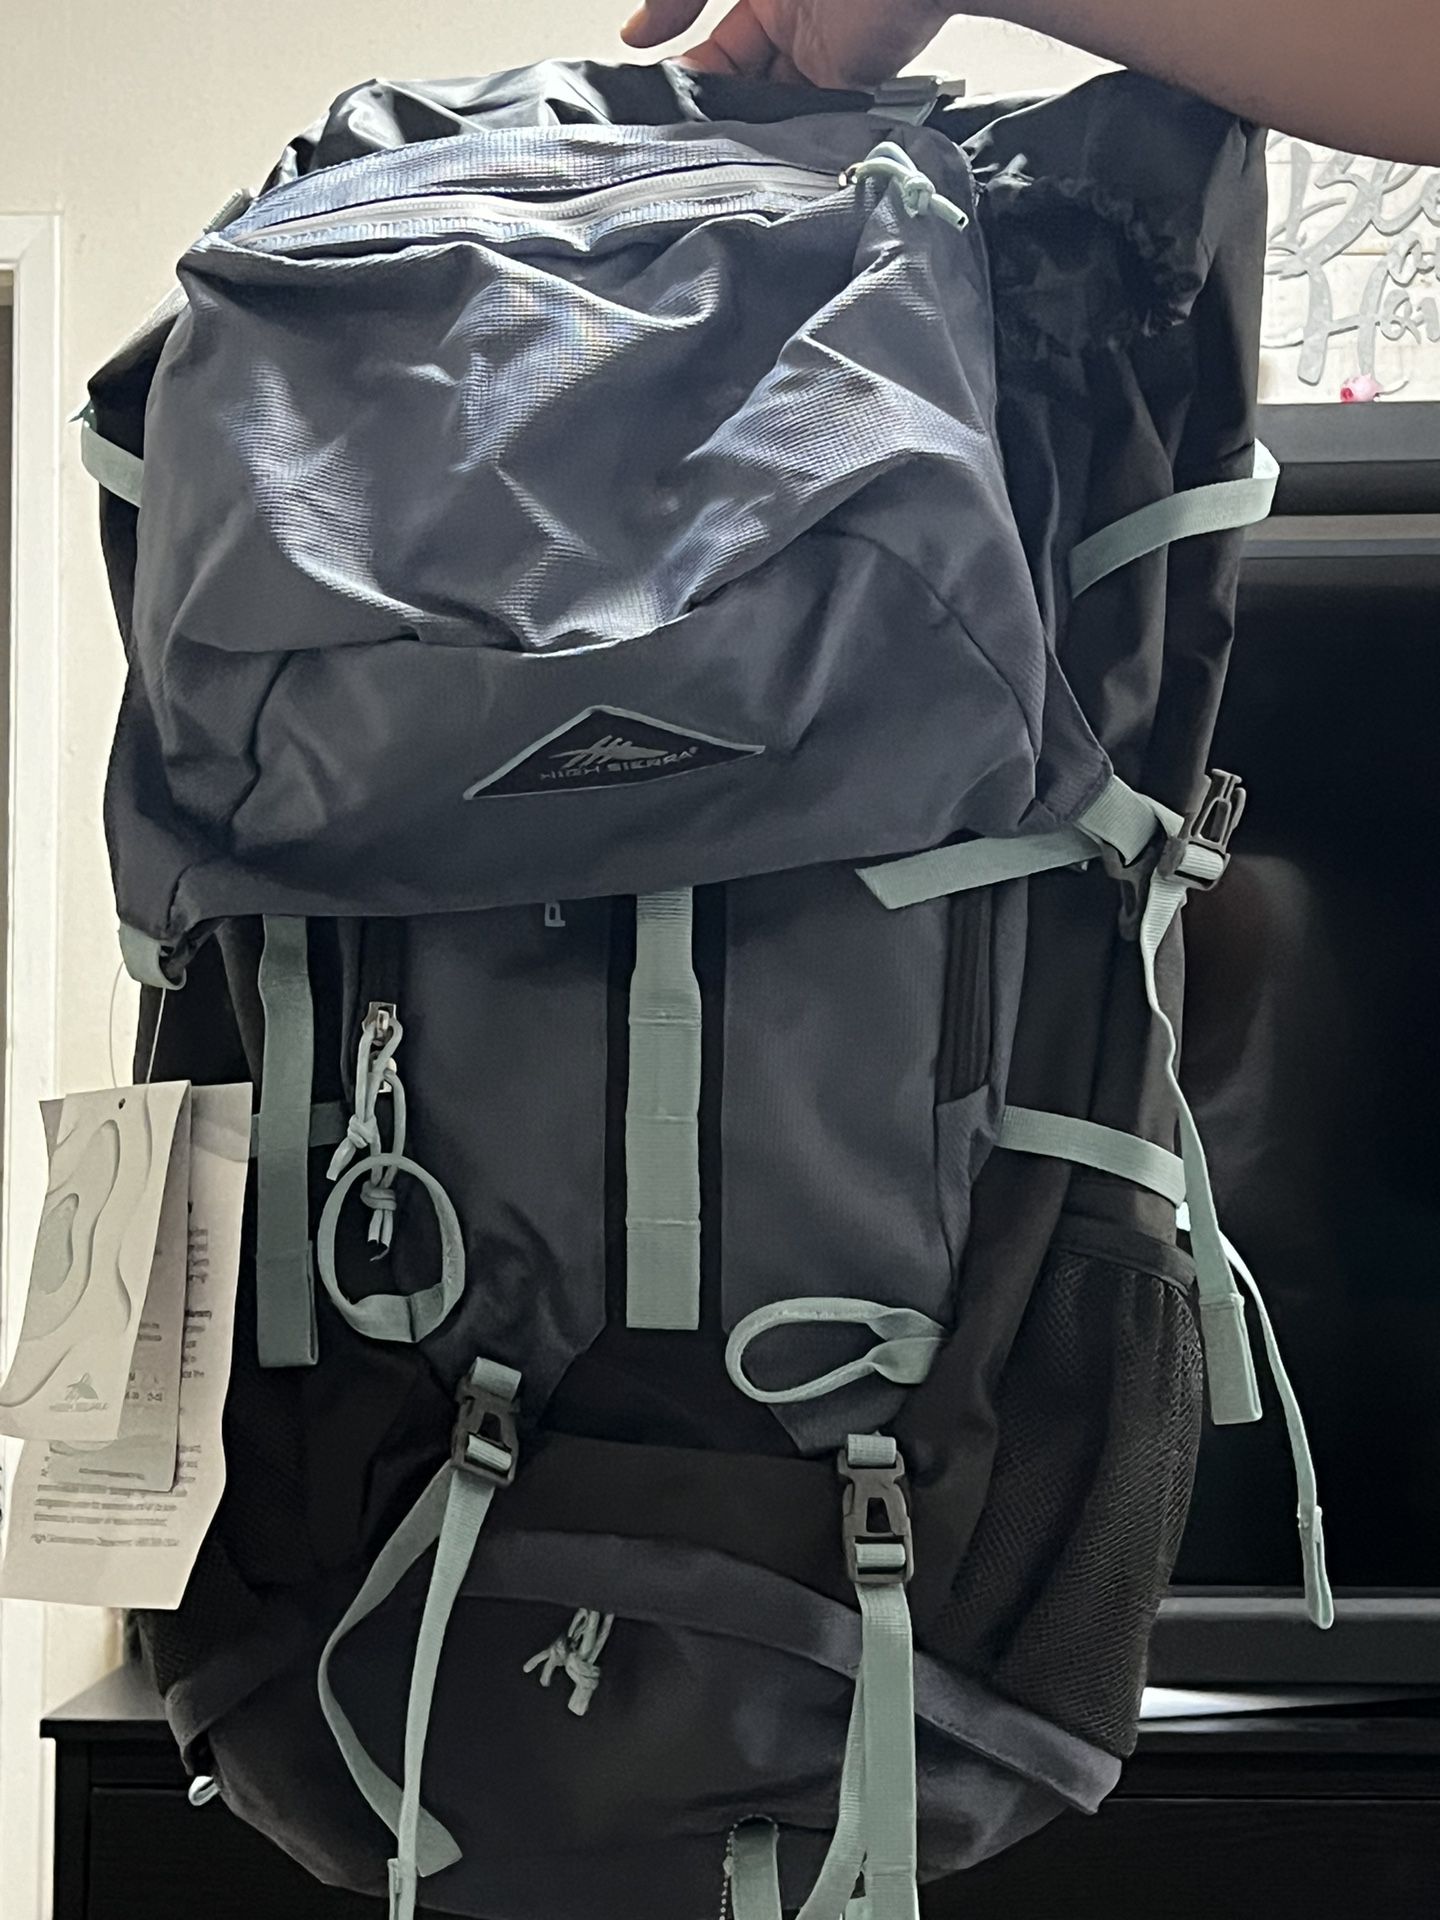 Hiking/Travel CARRYON Backpack